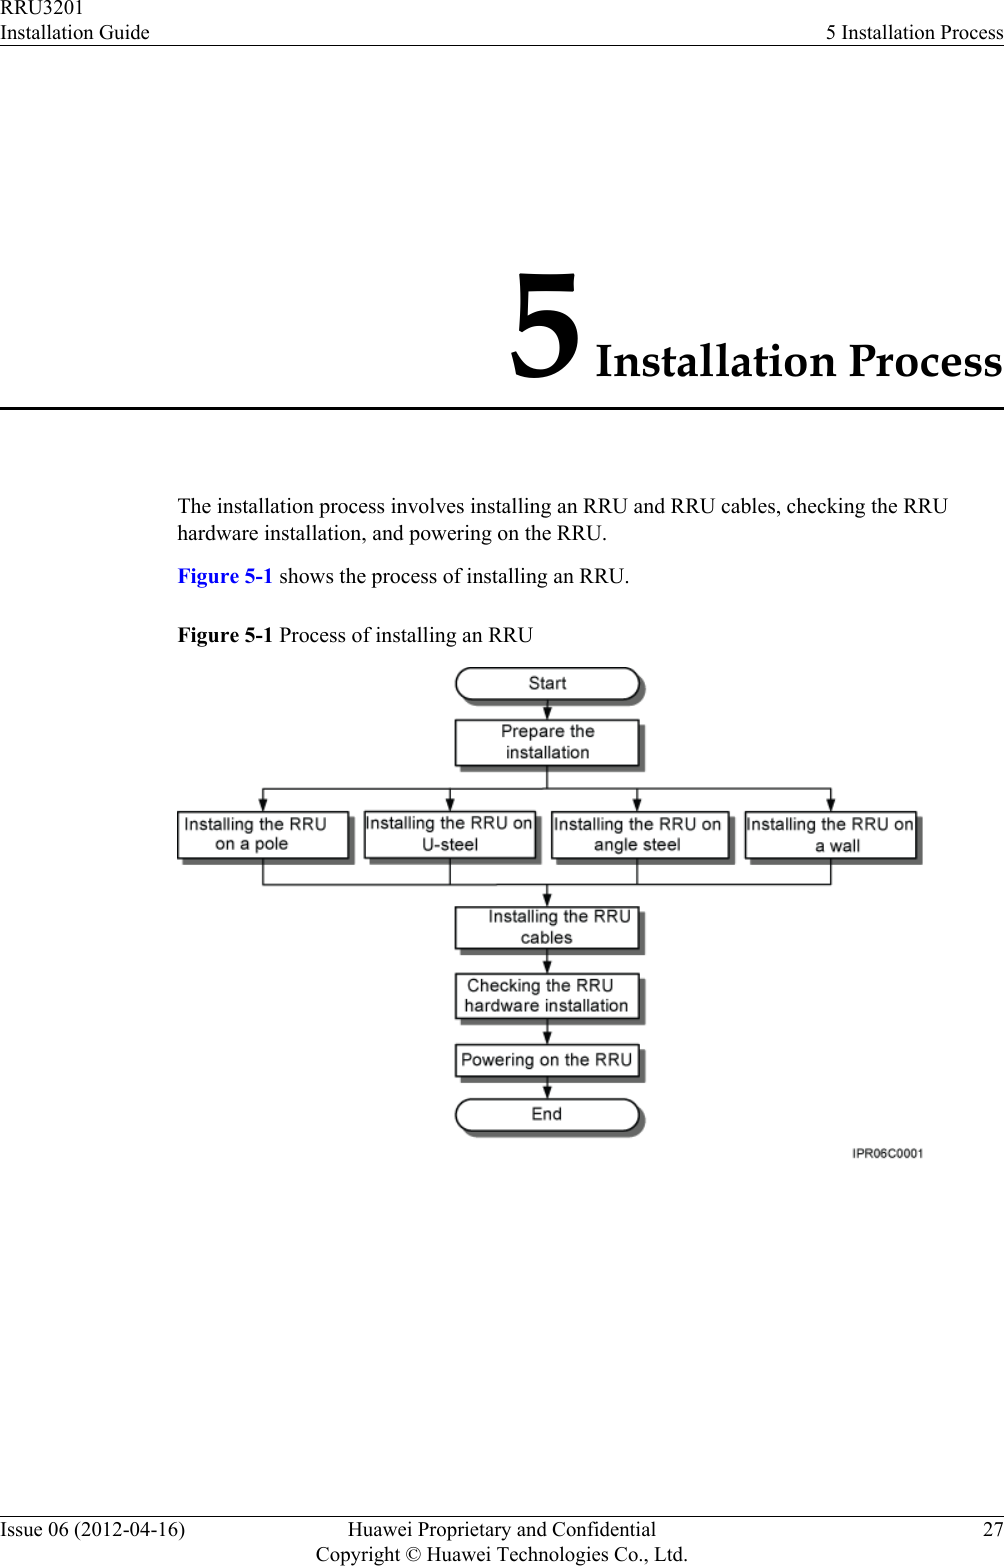 5 Installation ProcessThe installation process involves installing an RRU and RRU cables, checking the RRUhardware installation, and powering on the RRU.Figure 5-1 shows the process of installing an RRU.Figure 5-1 Process of installing an RRU RRU3201Installation Guide 5 Installation ProcessIssue 06 (2012-04-16) Huawei Proprietary and ConfidentialCopyright © Huawei Technologies Co., Ltd.27